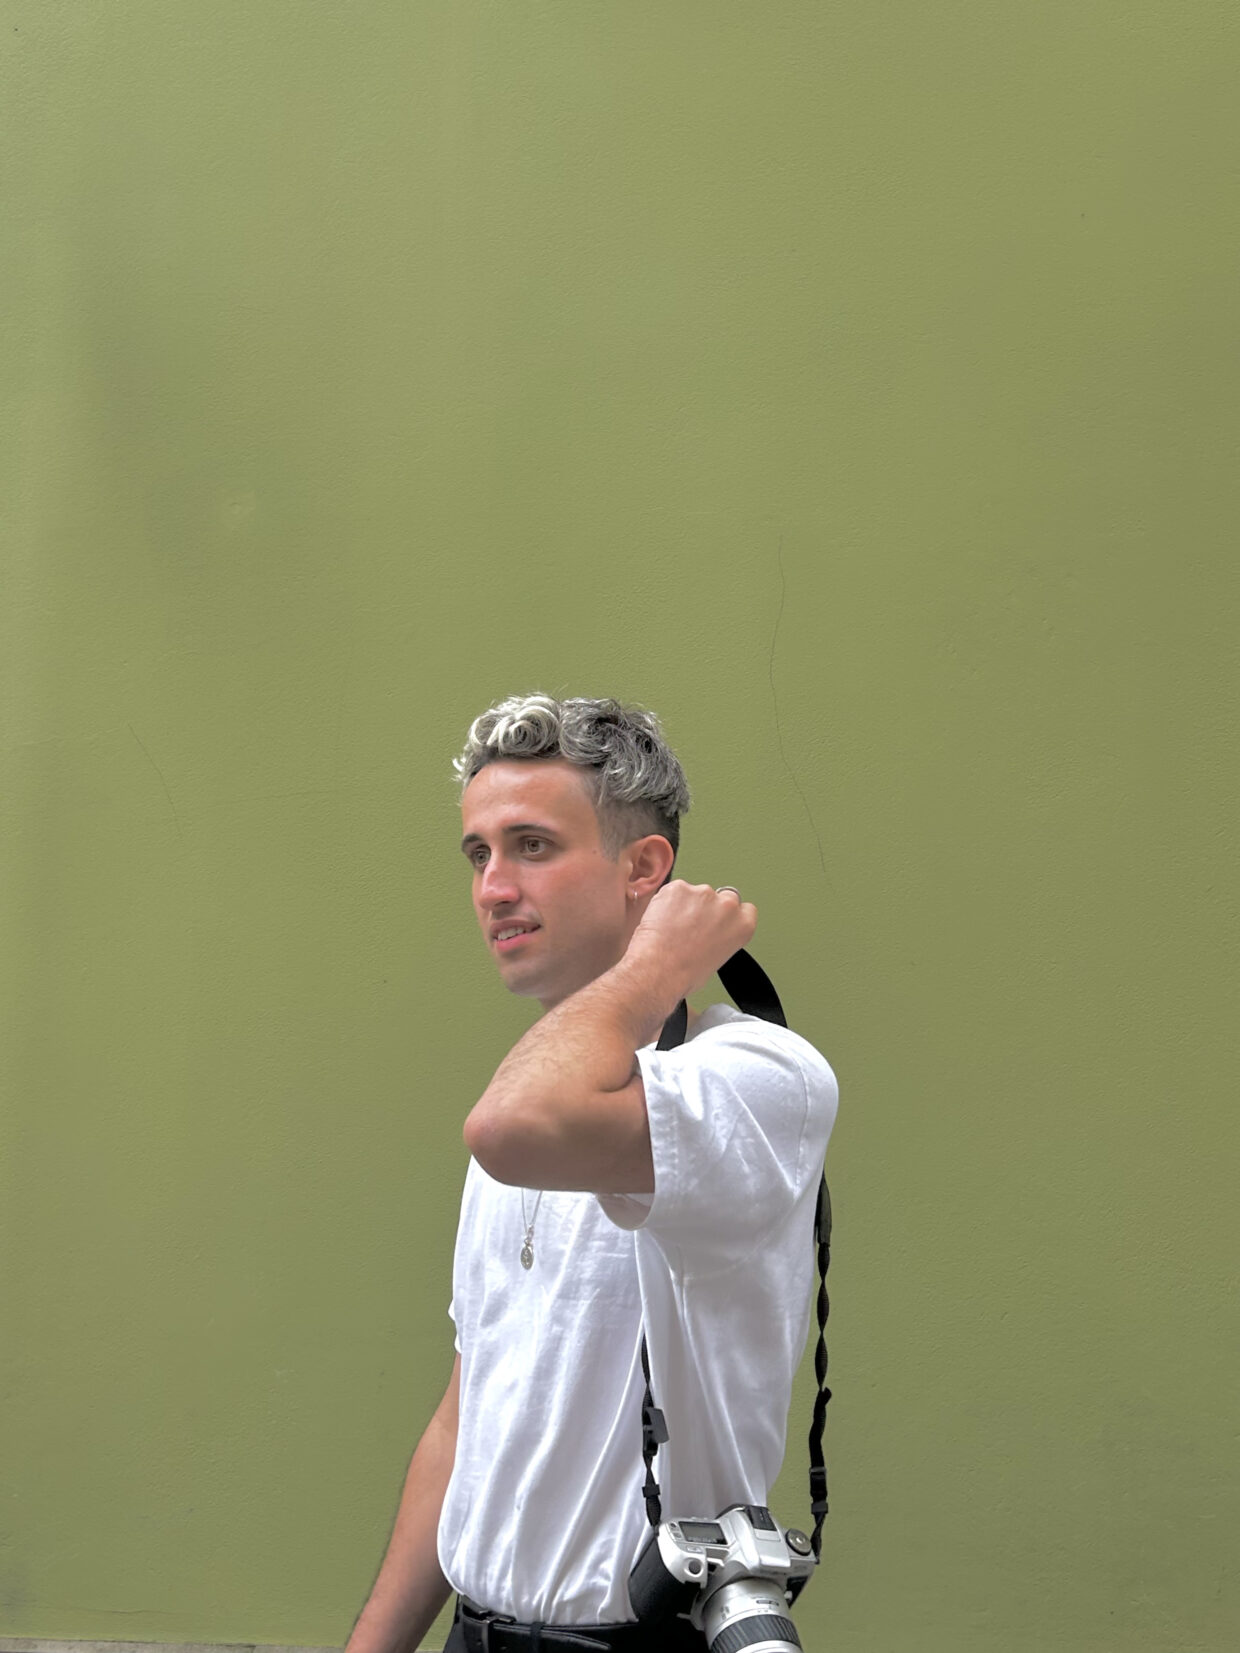 Declan has short silver hair and is wearing a white t-shirt and a camera. Declan is standing against a green background in Poland.